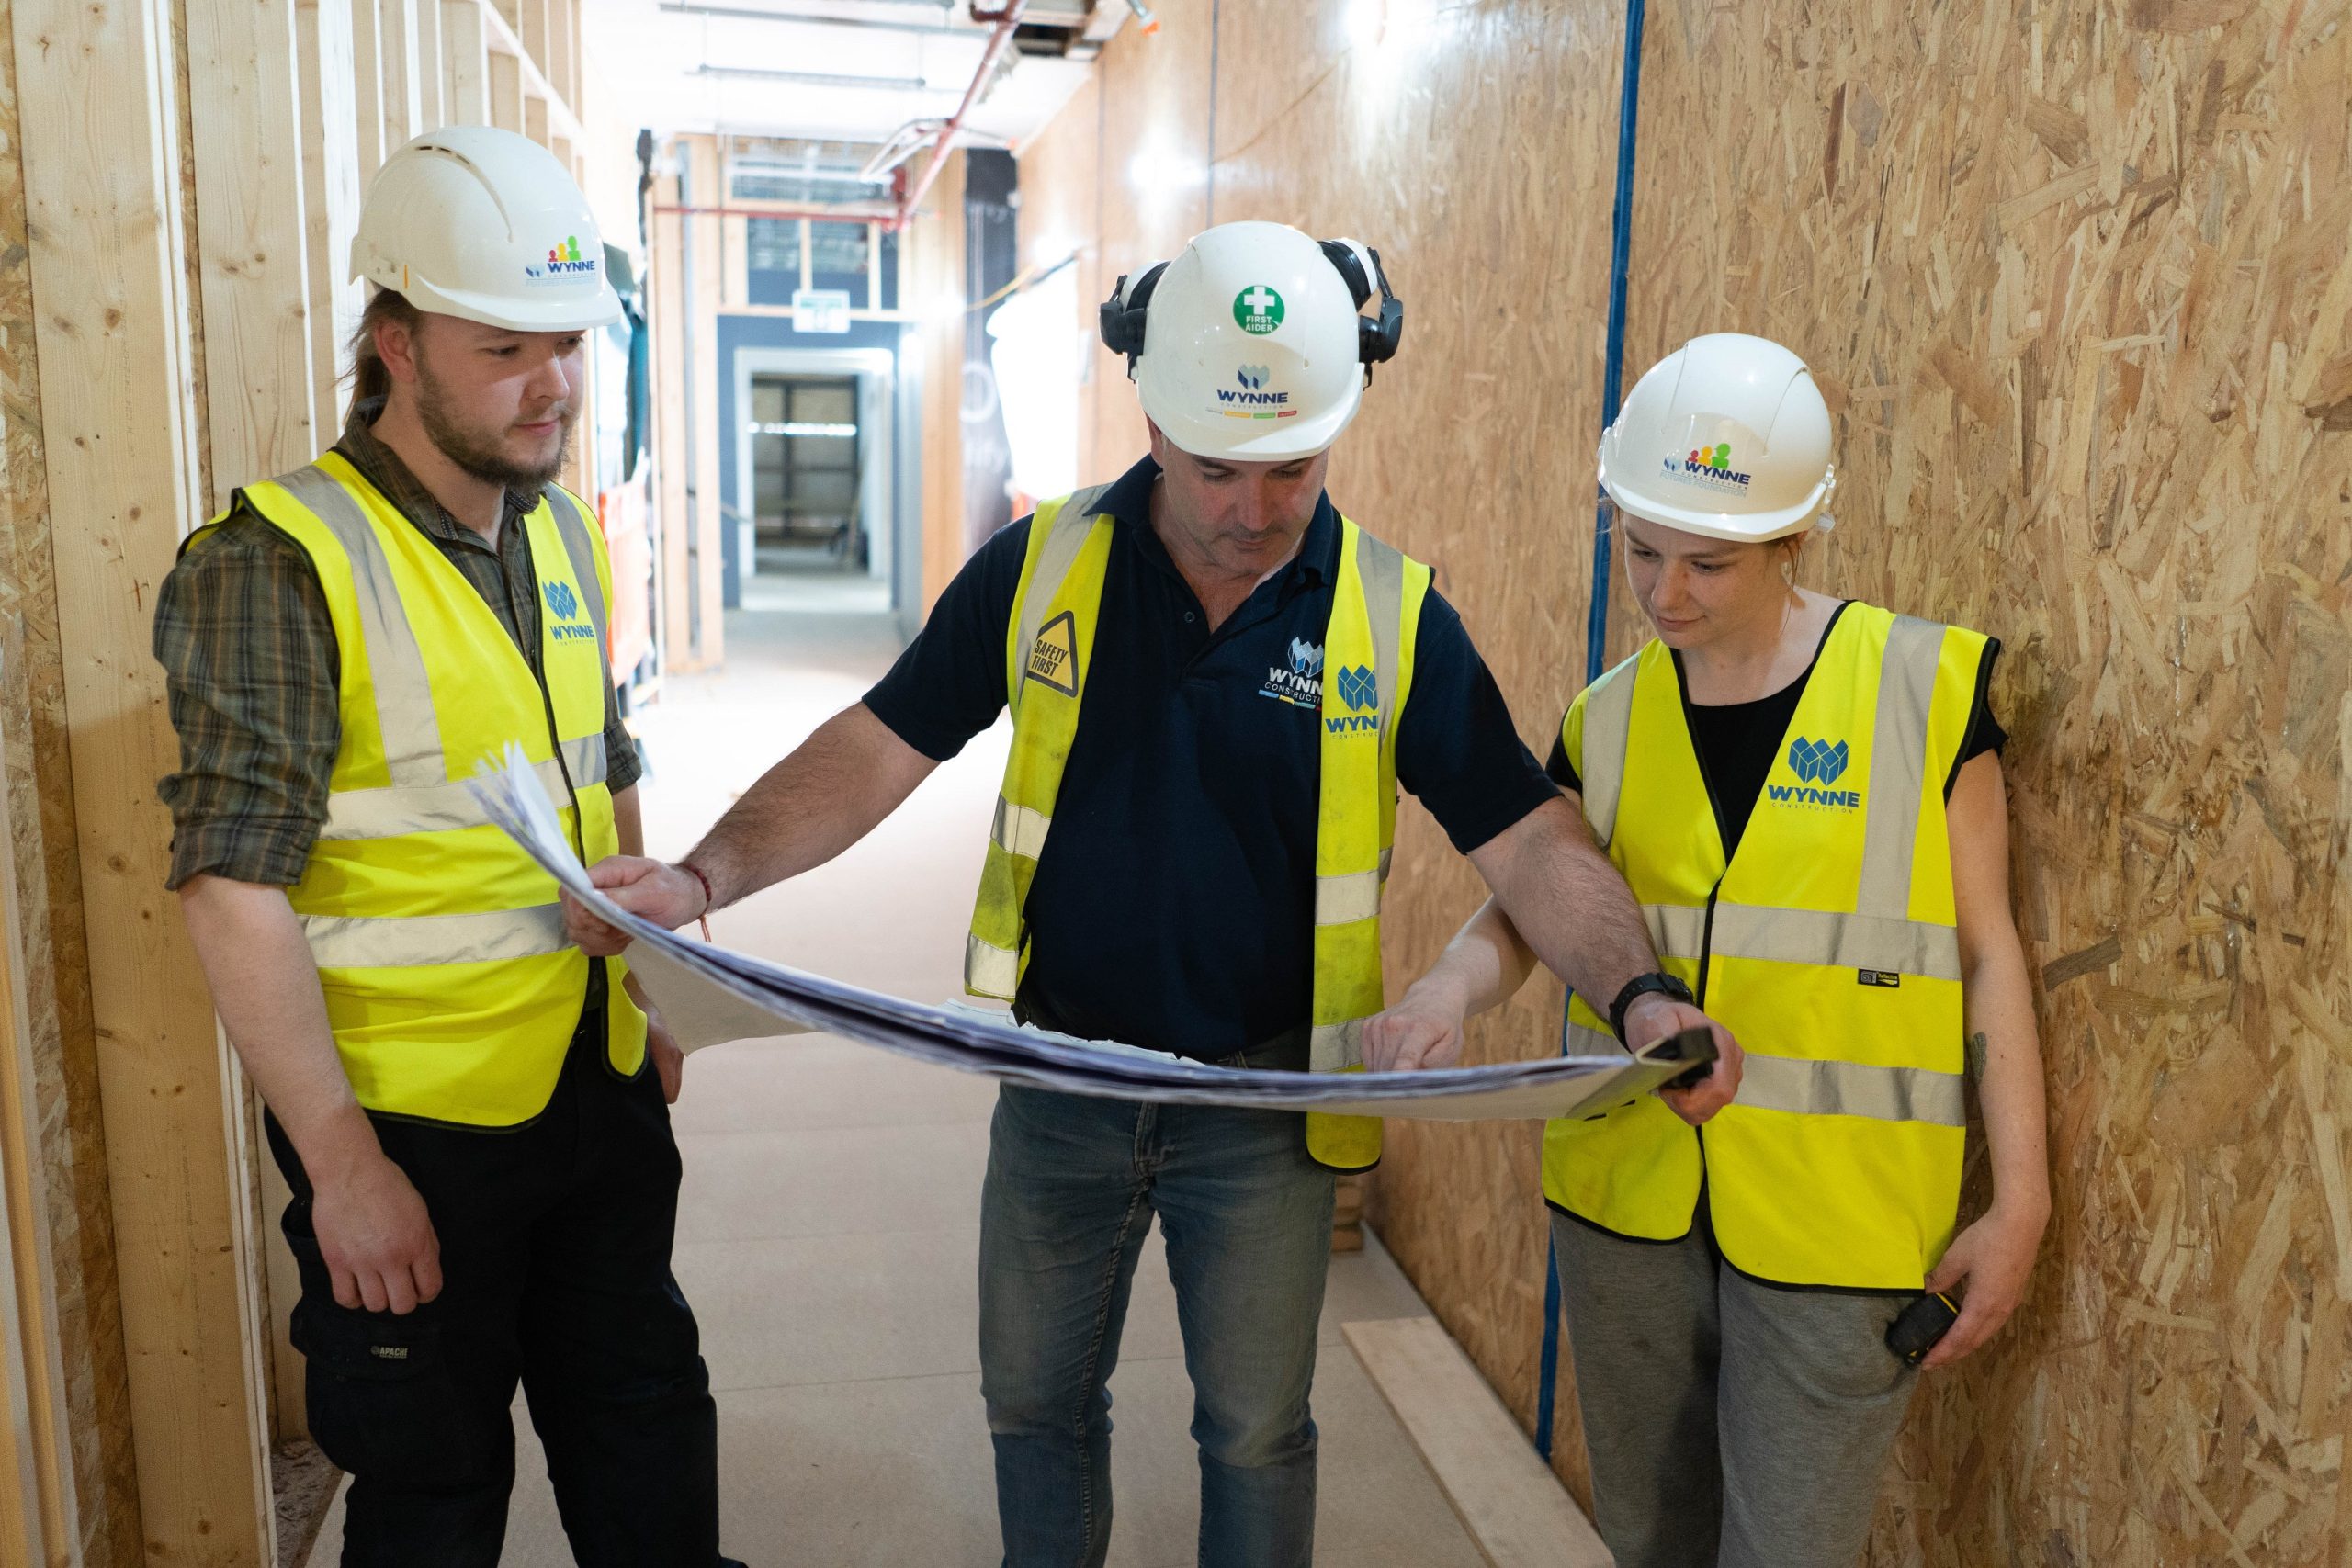 Training subsidies available for construction businesses through CITB employer network